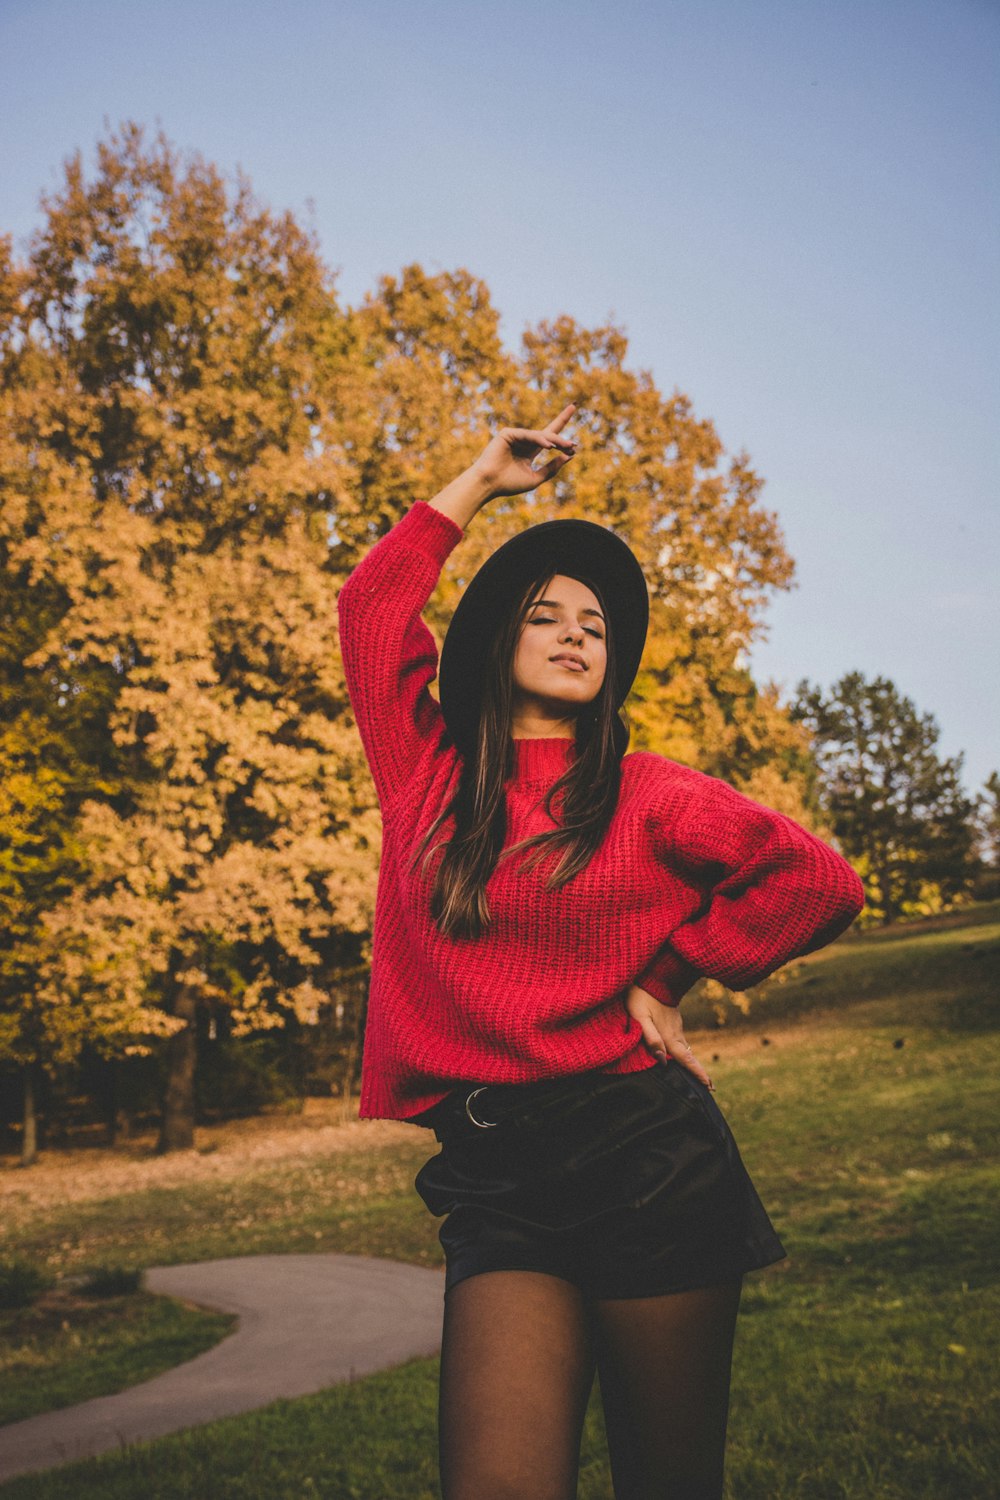 woman in red sweater standing on grass near trees during daytime